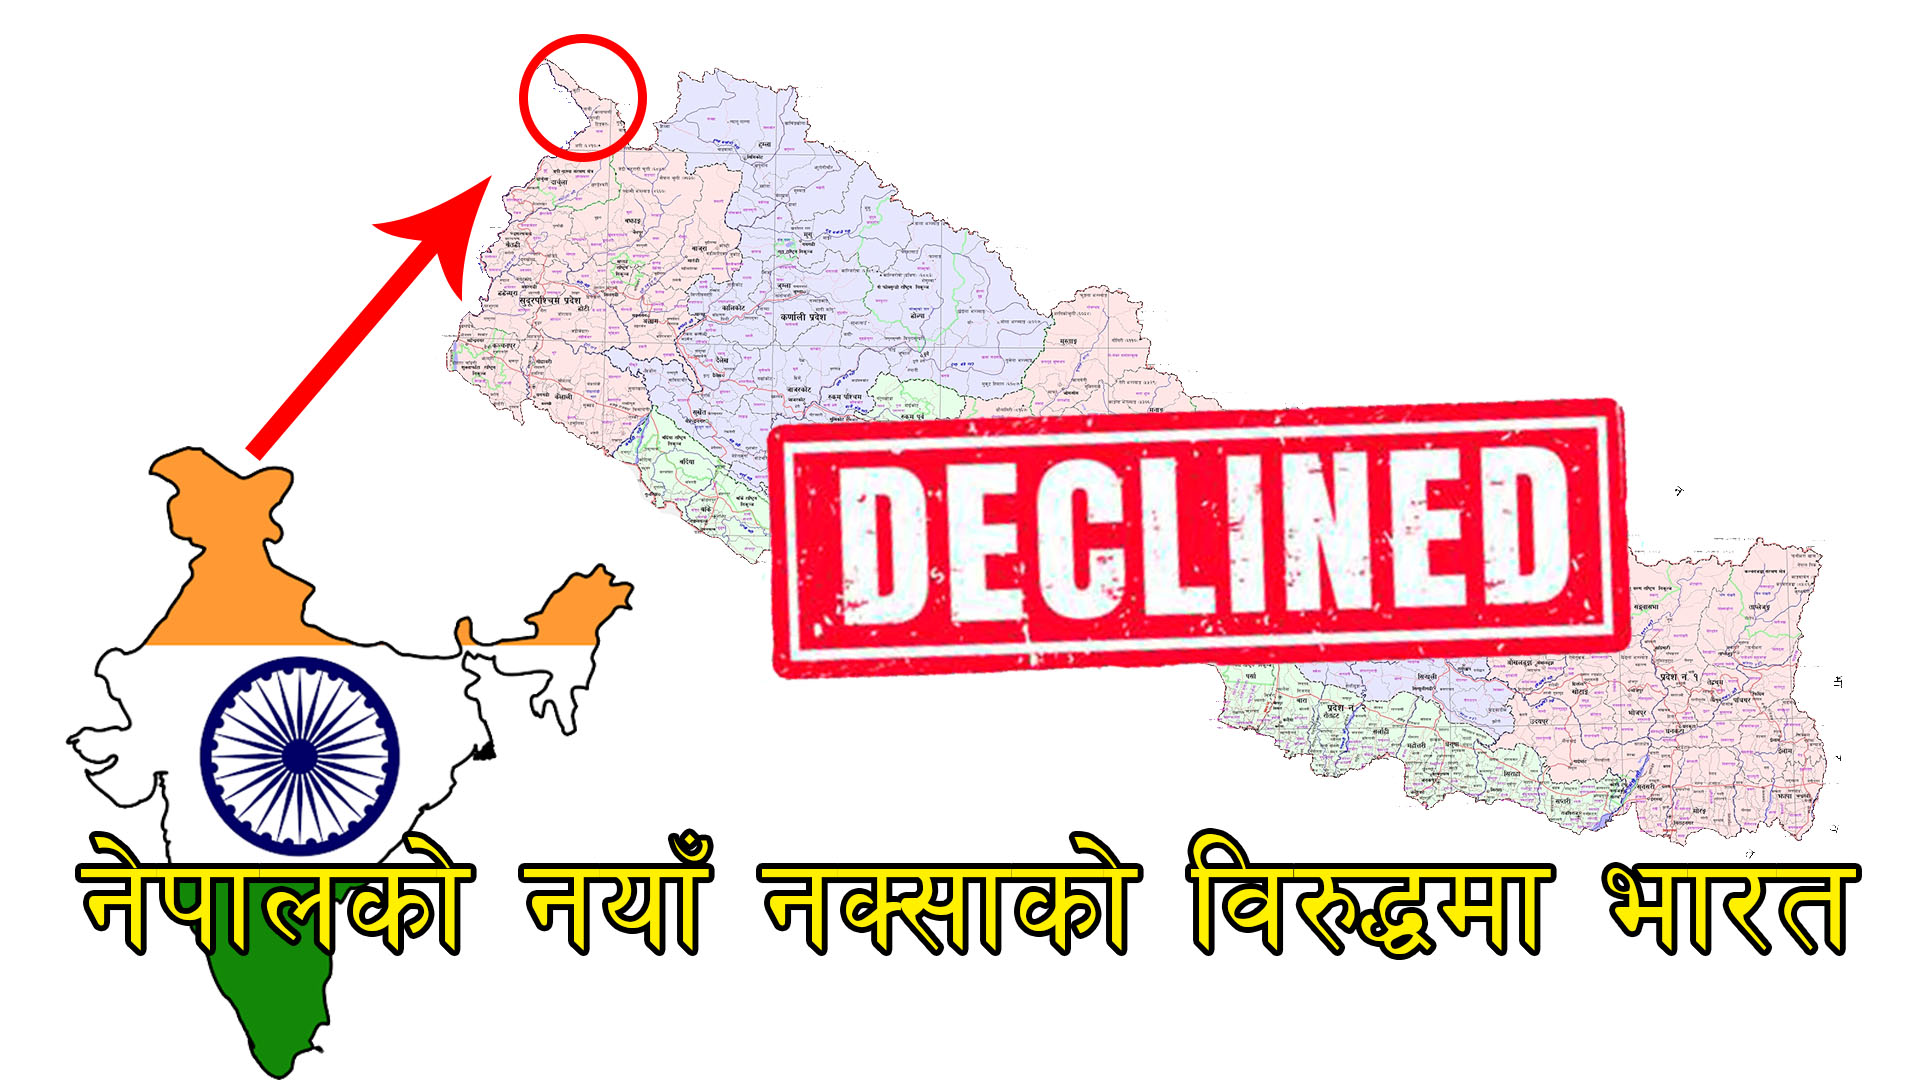 Government of India against the new map of Nepal